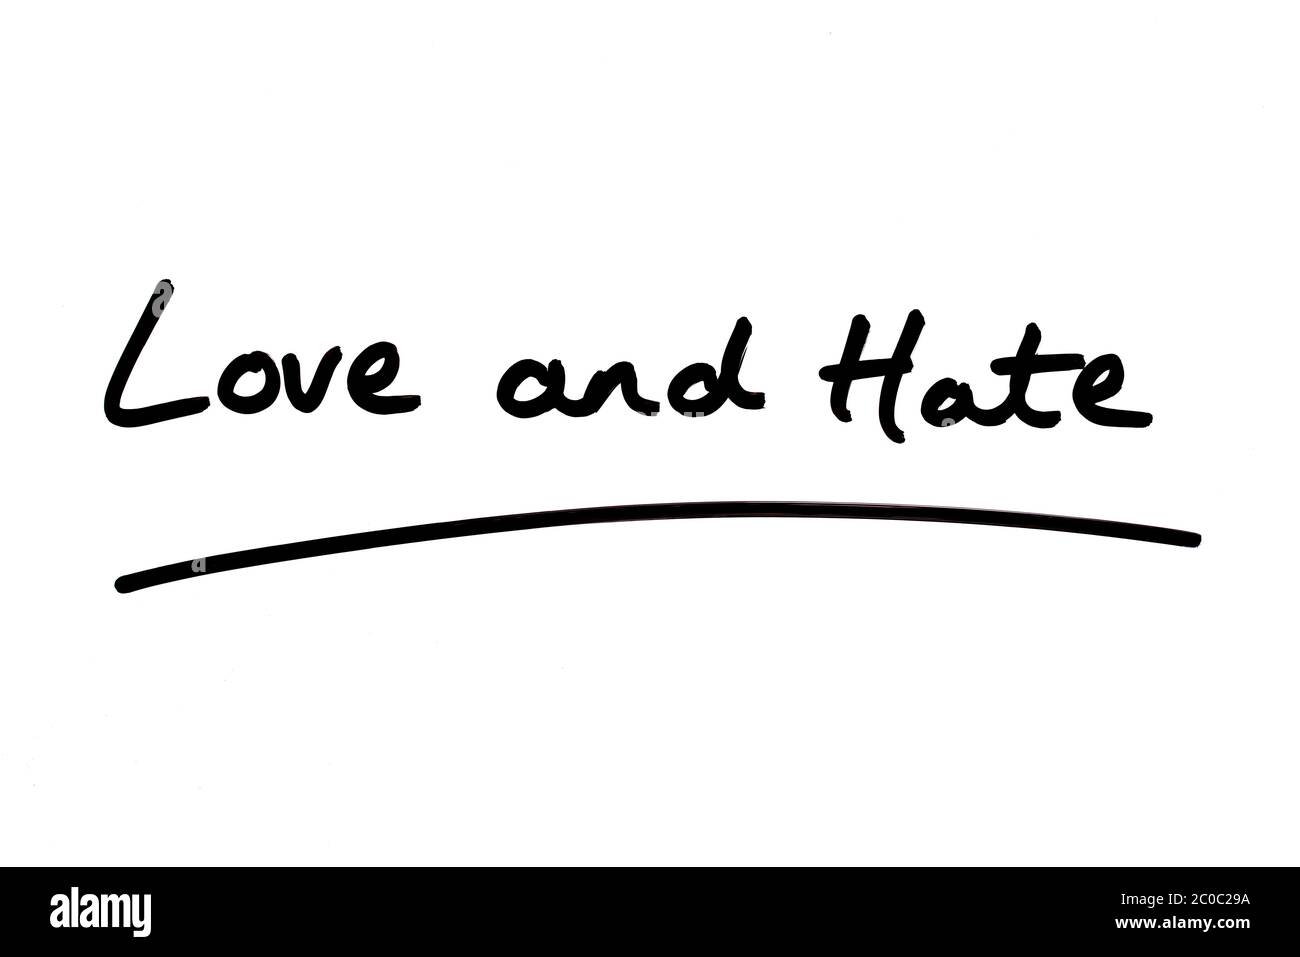 Love and Hate handwritten on a white background. Stock Photo